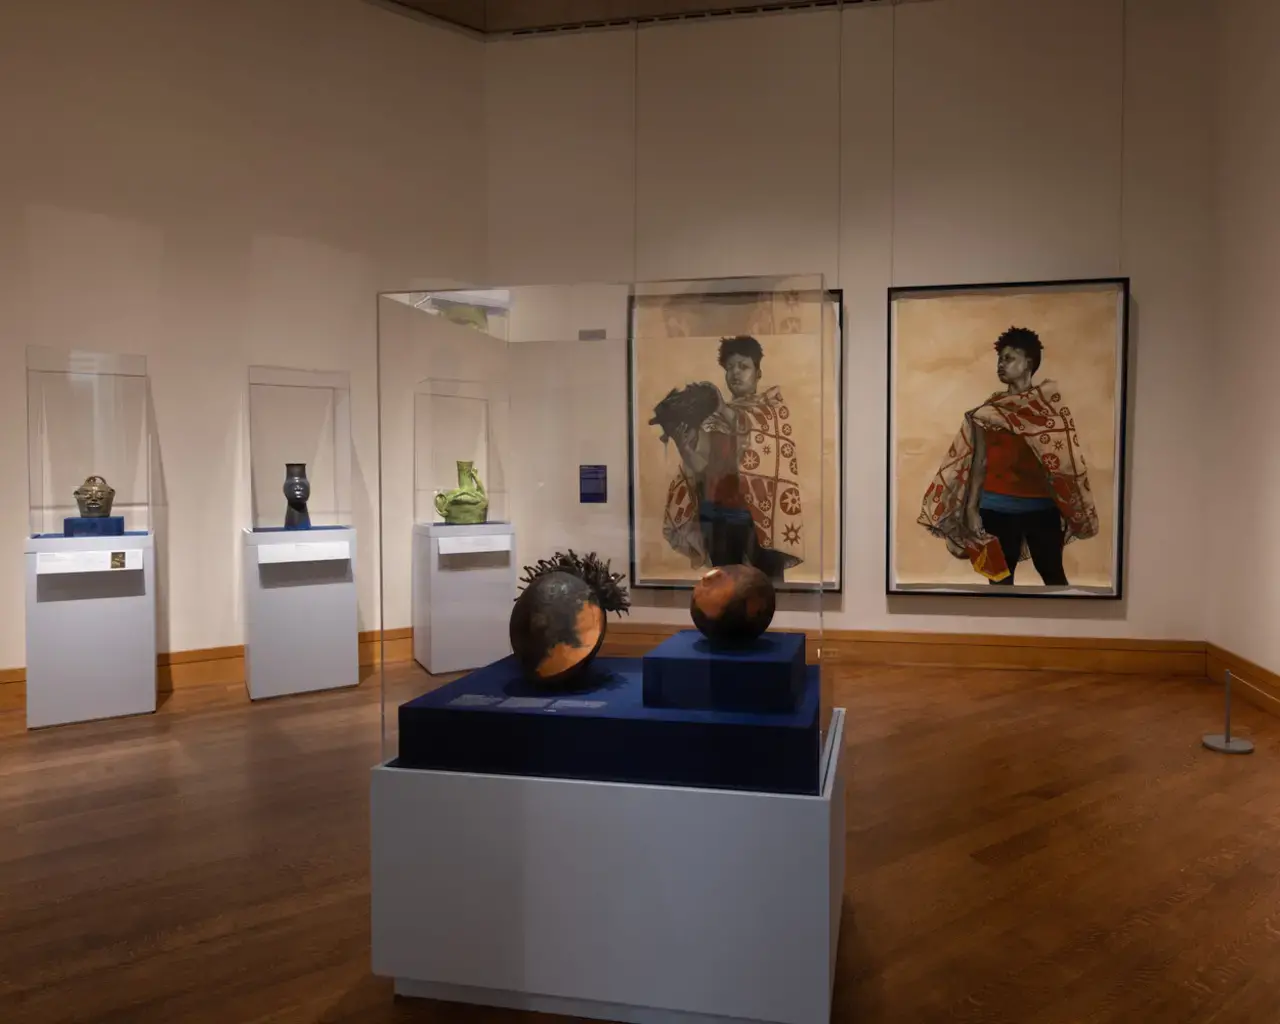 Hear Me Now: The Black Potters of Old Edgefield, SC, installation view, 2022, foreground works by Pew Fellow Adebunmi Gbadebo, Metropolitan Museum of Art, New York, NY. Photo courtesy of Adebunmi Gbadebo.&nbsp;